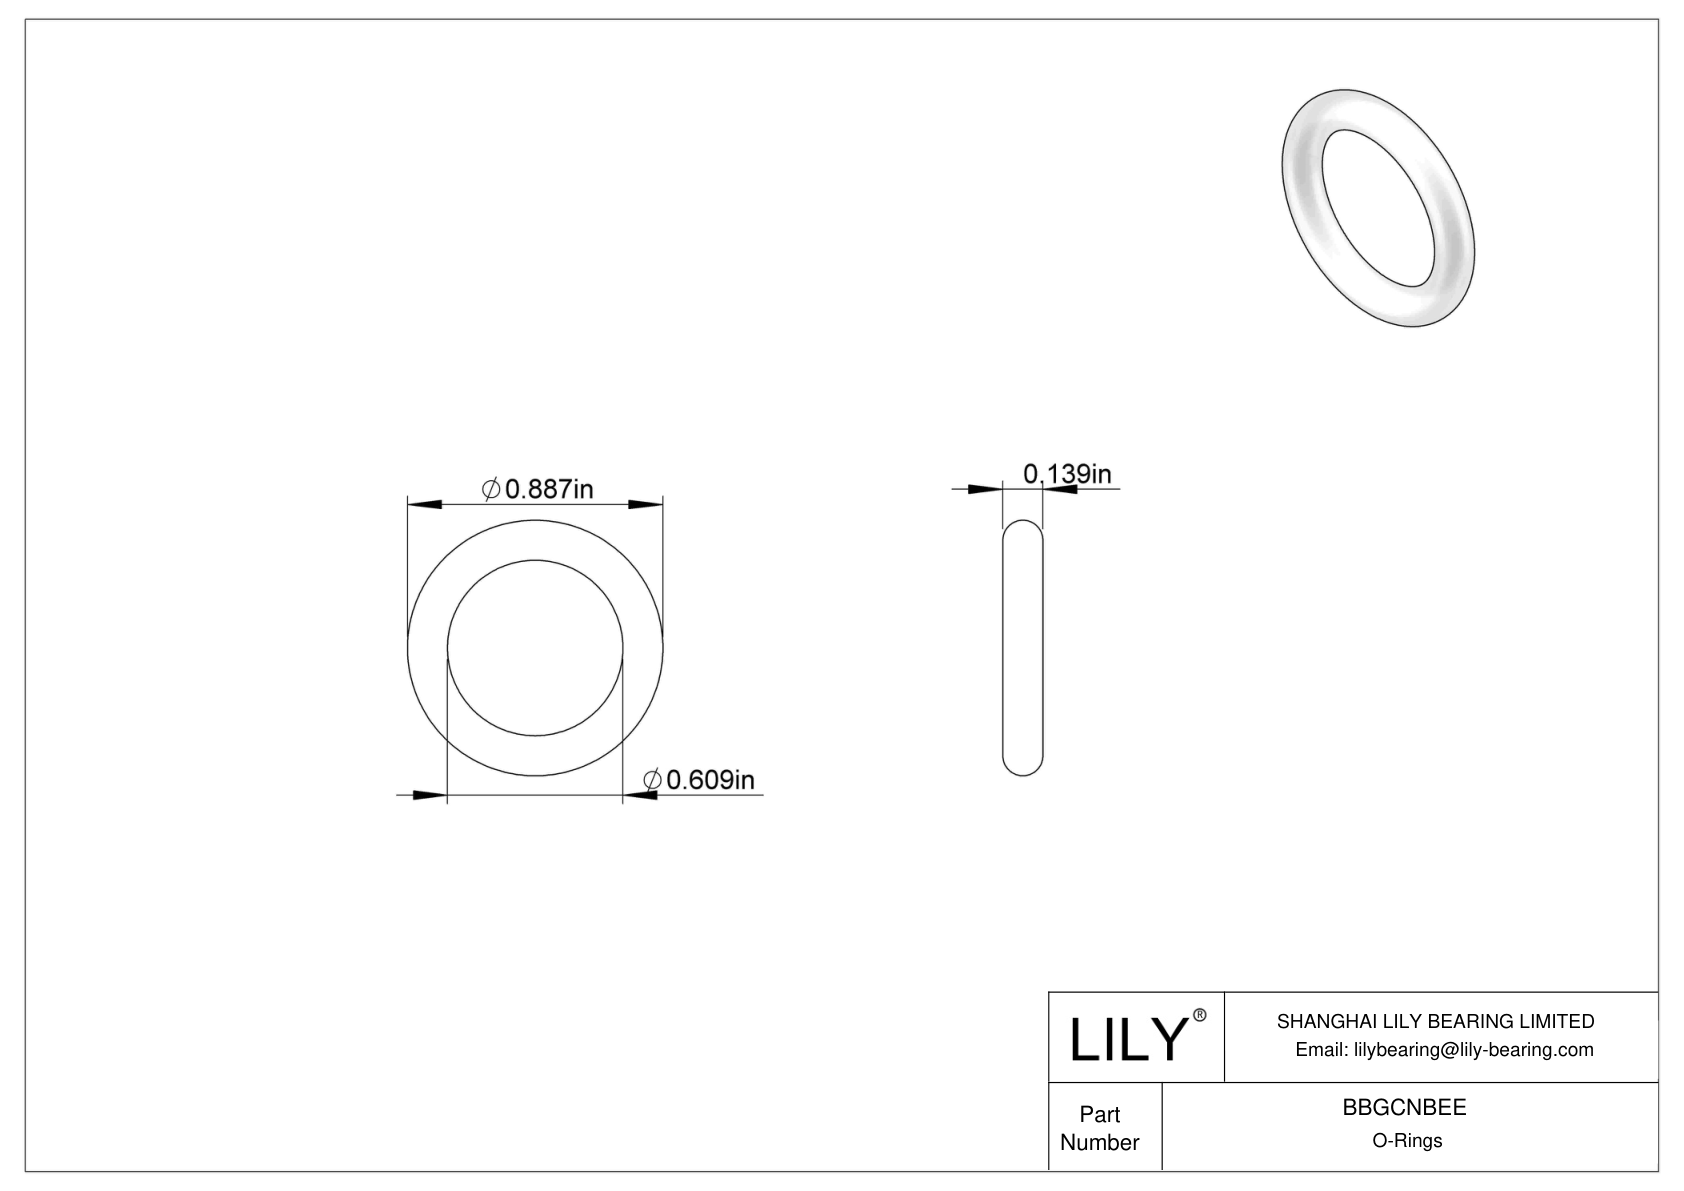 BBGCNBEE High Temperature O-Rings Round cad drawing